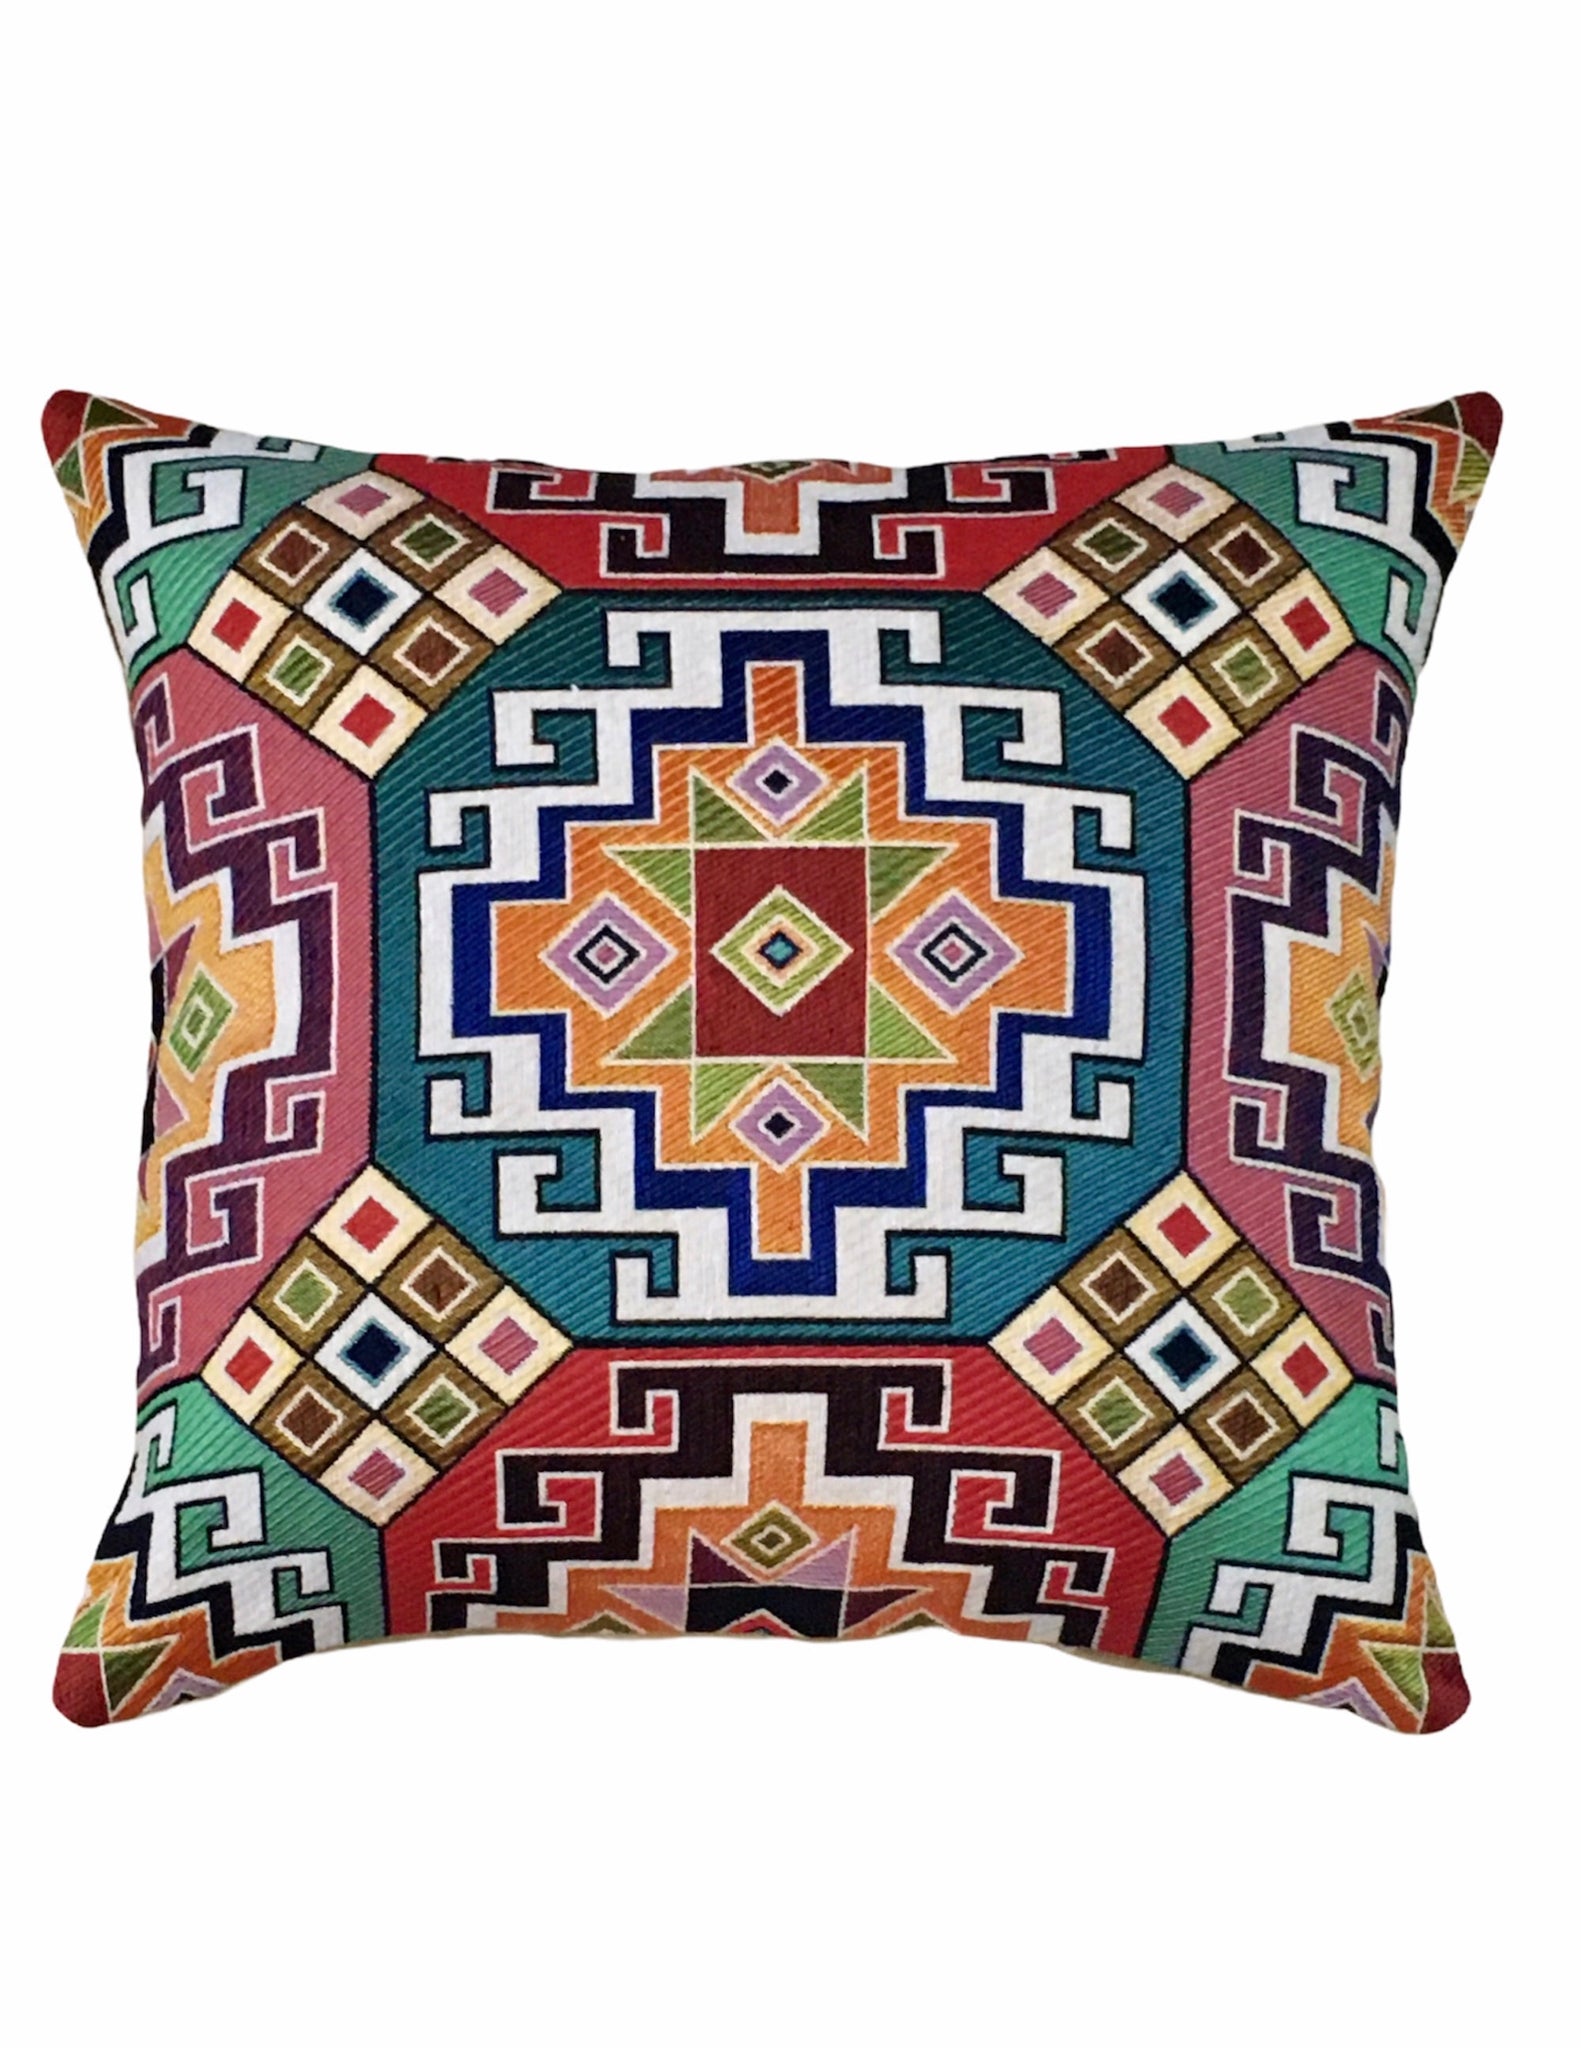 Ethnic Turkish Throw Pillow Cover | Kilim Pillow | Woven Pillow Cover | Boho Pillow Case | Decorative Pillows | Cushion Cover| Home Gift 002